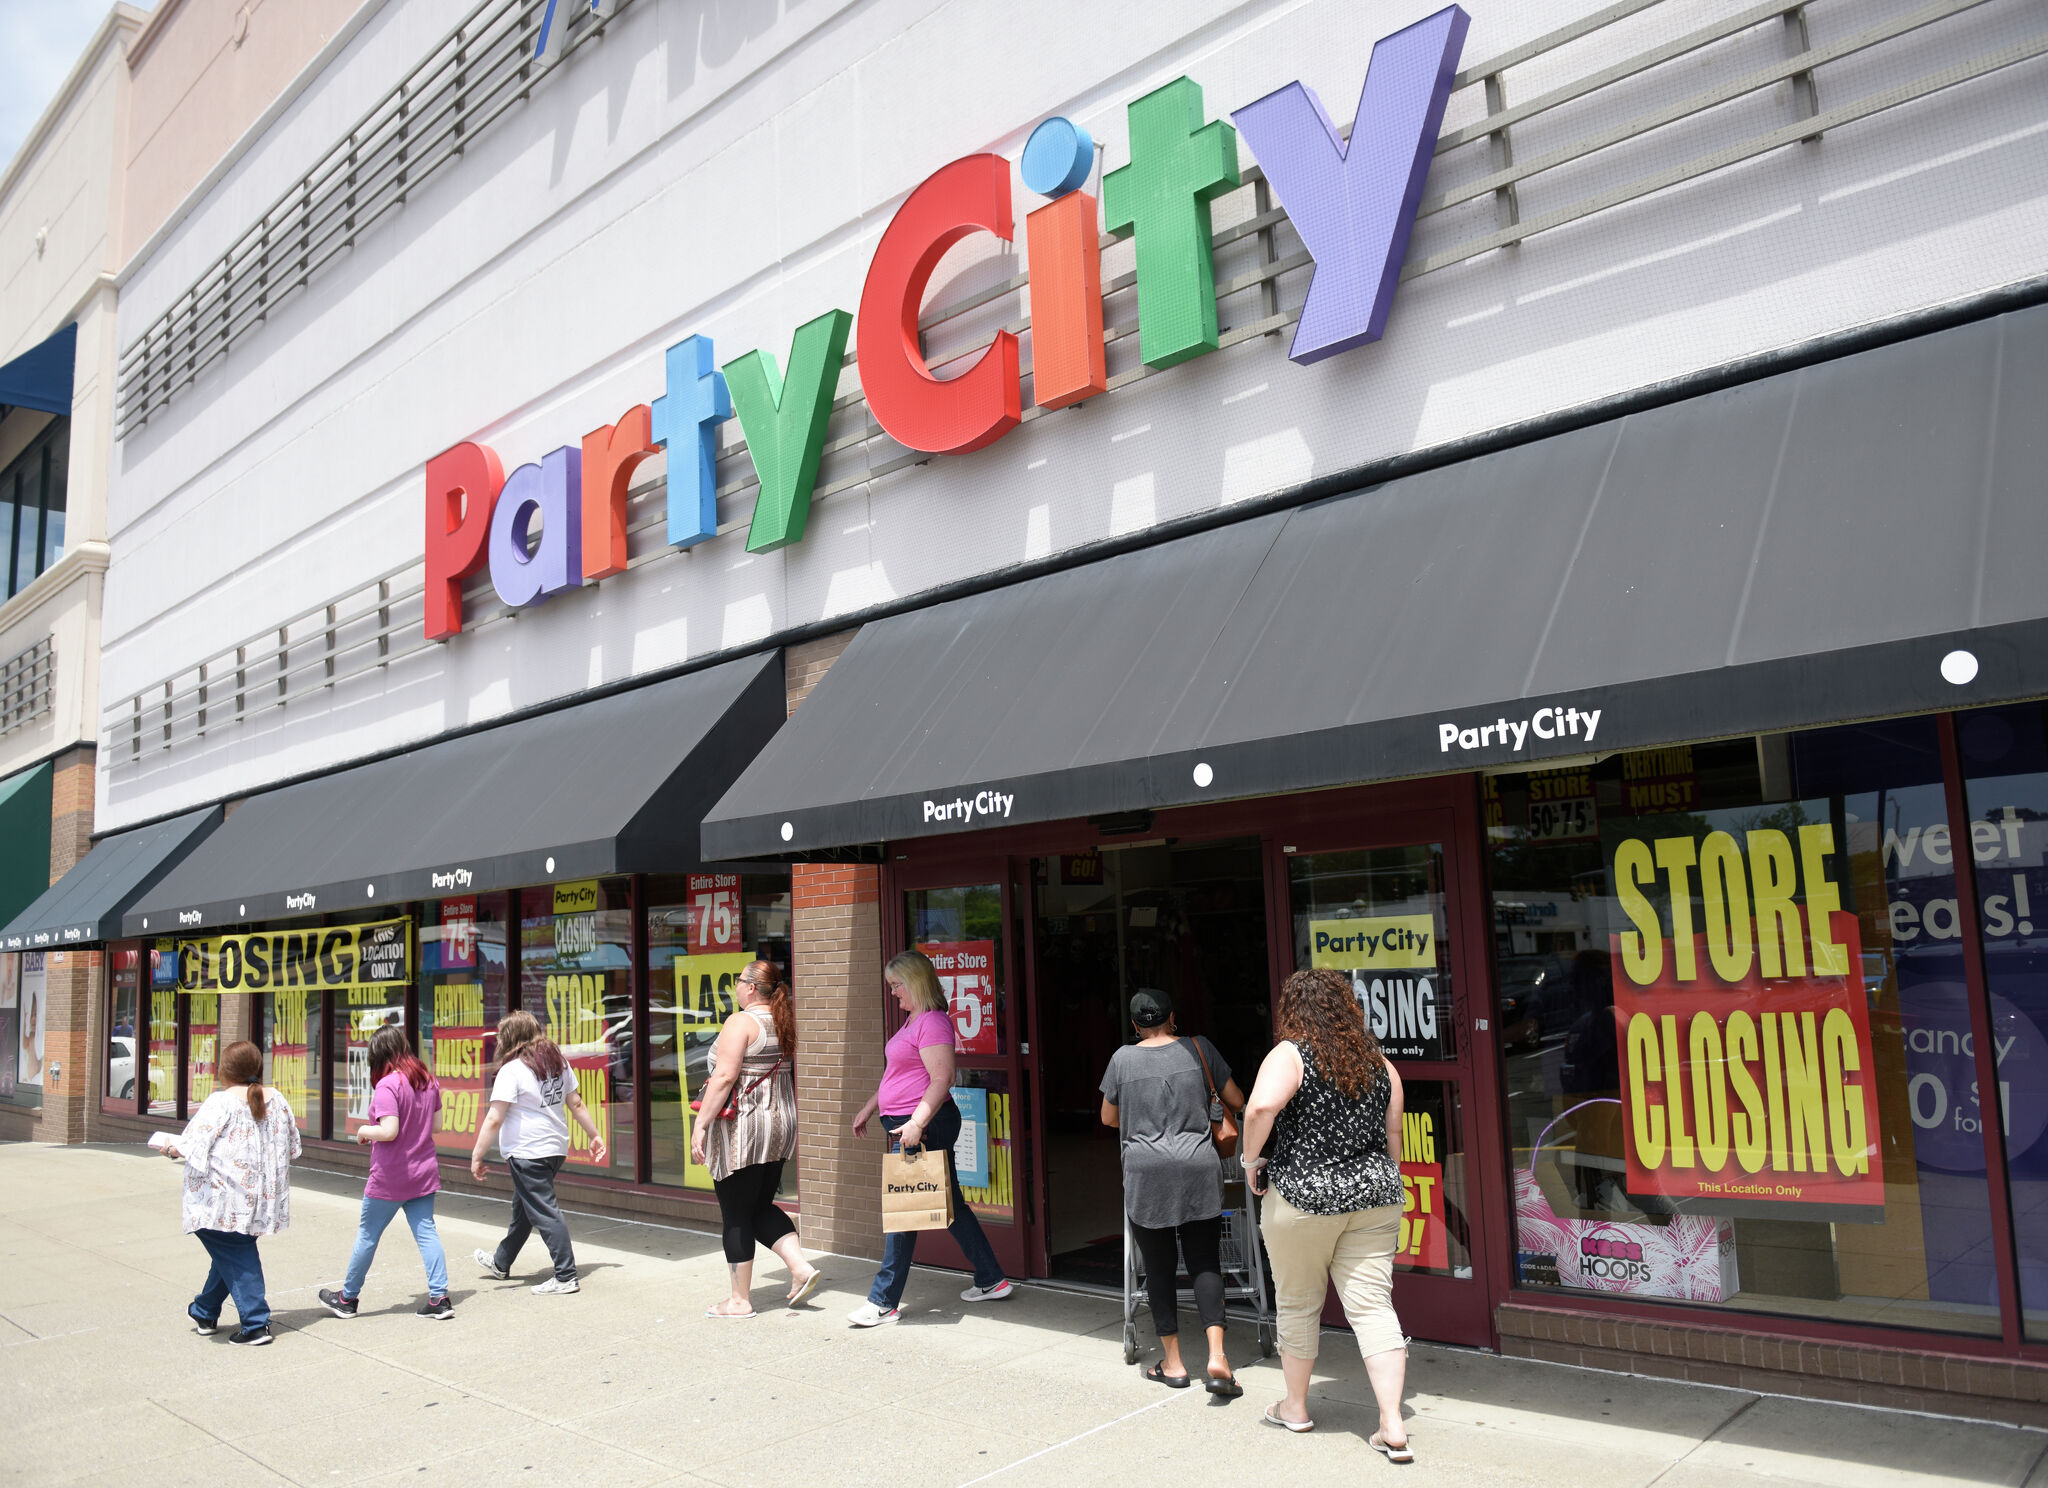 Party City to close in Stamford, keep open other locations in CT